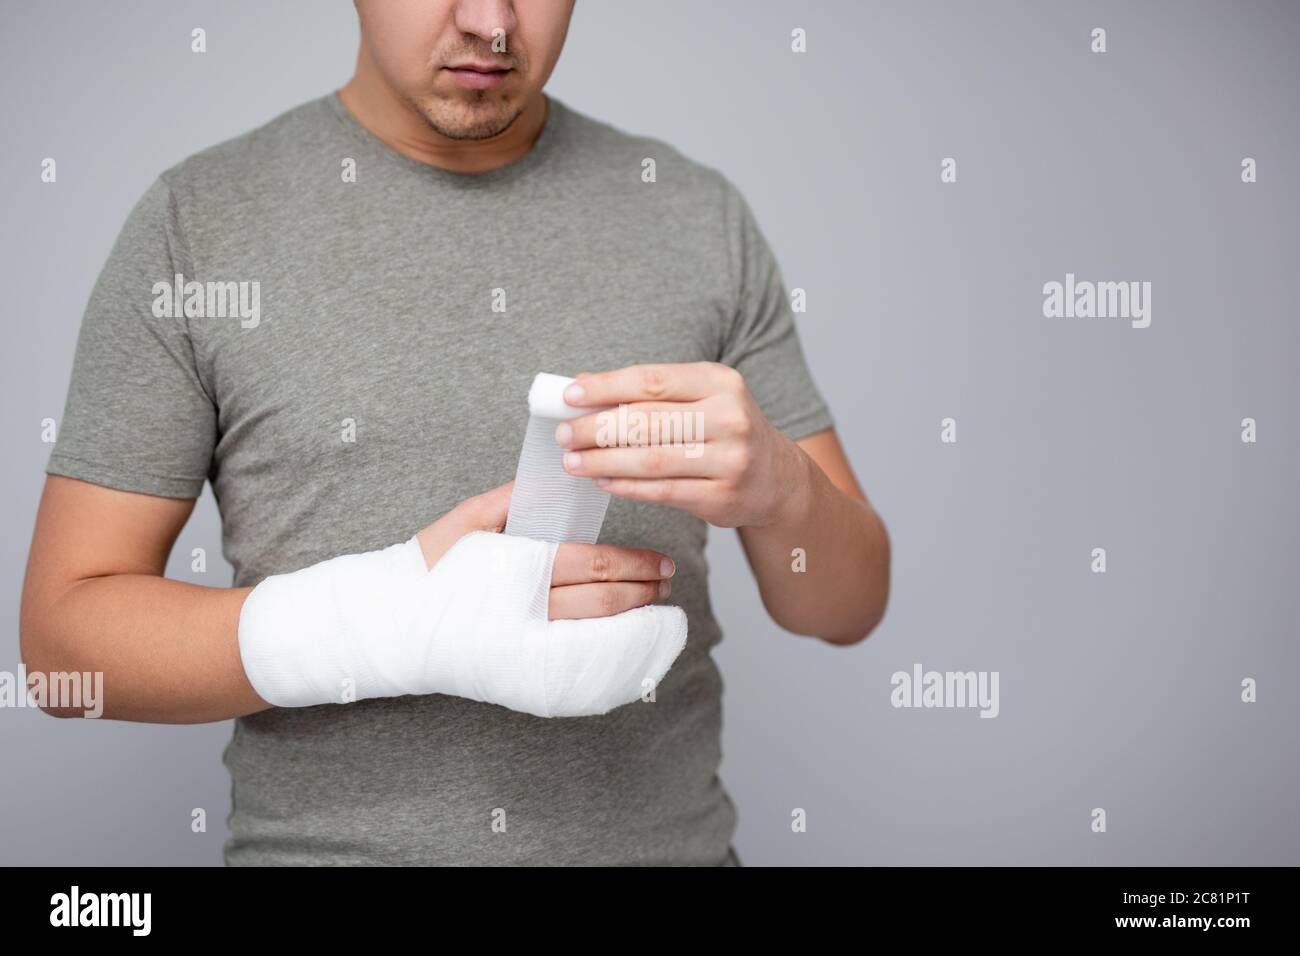 Hand Cast Fractured after an Accident Stock Photo - Image of hand